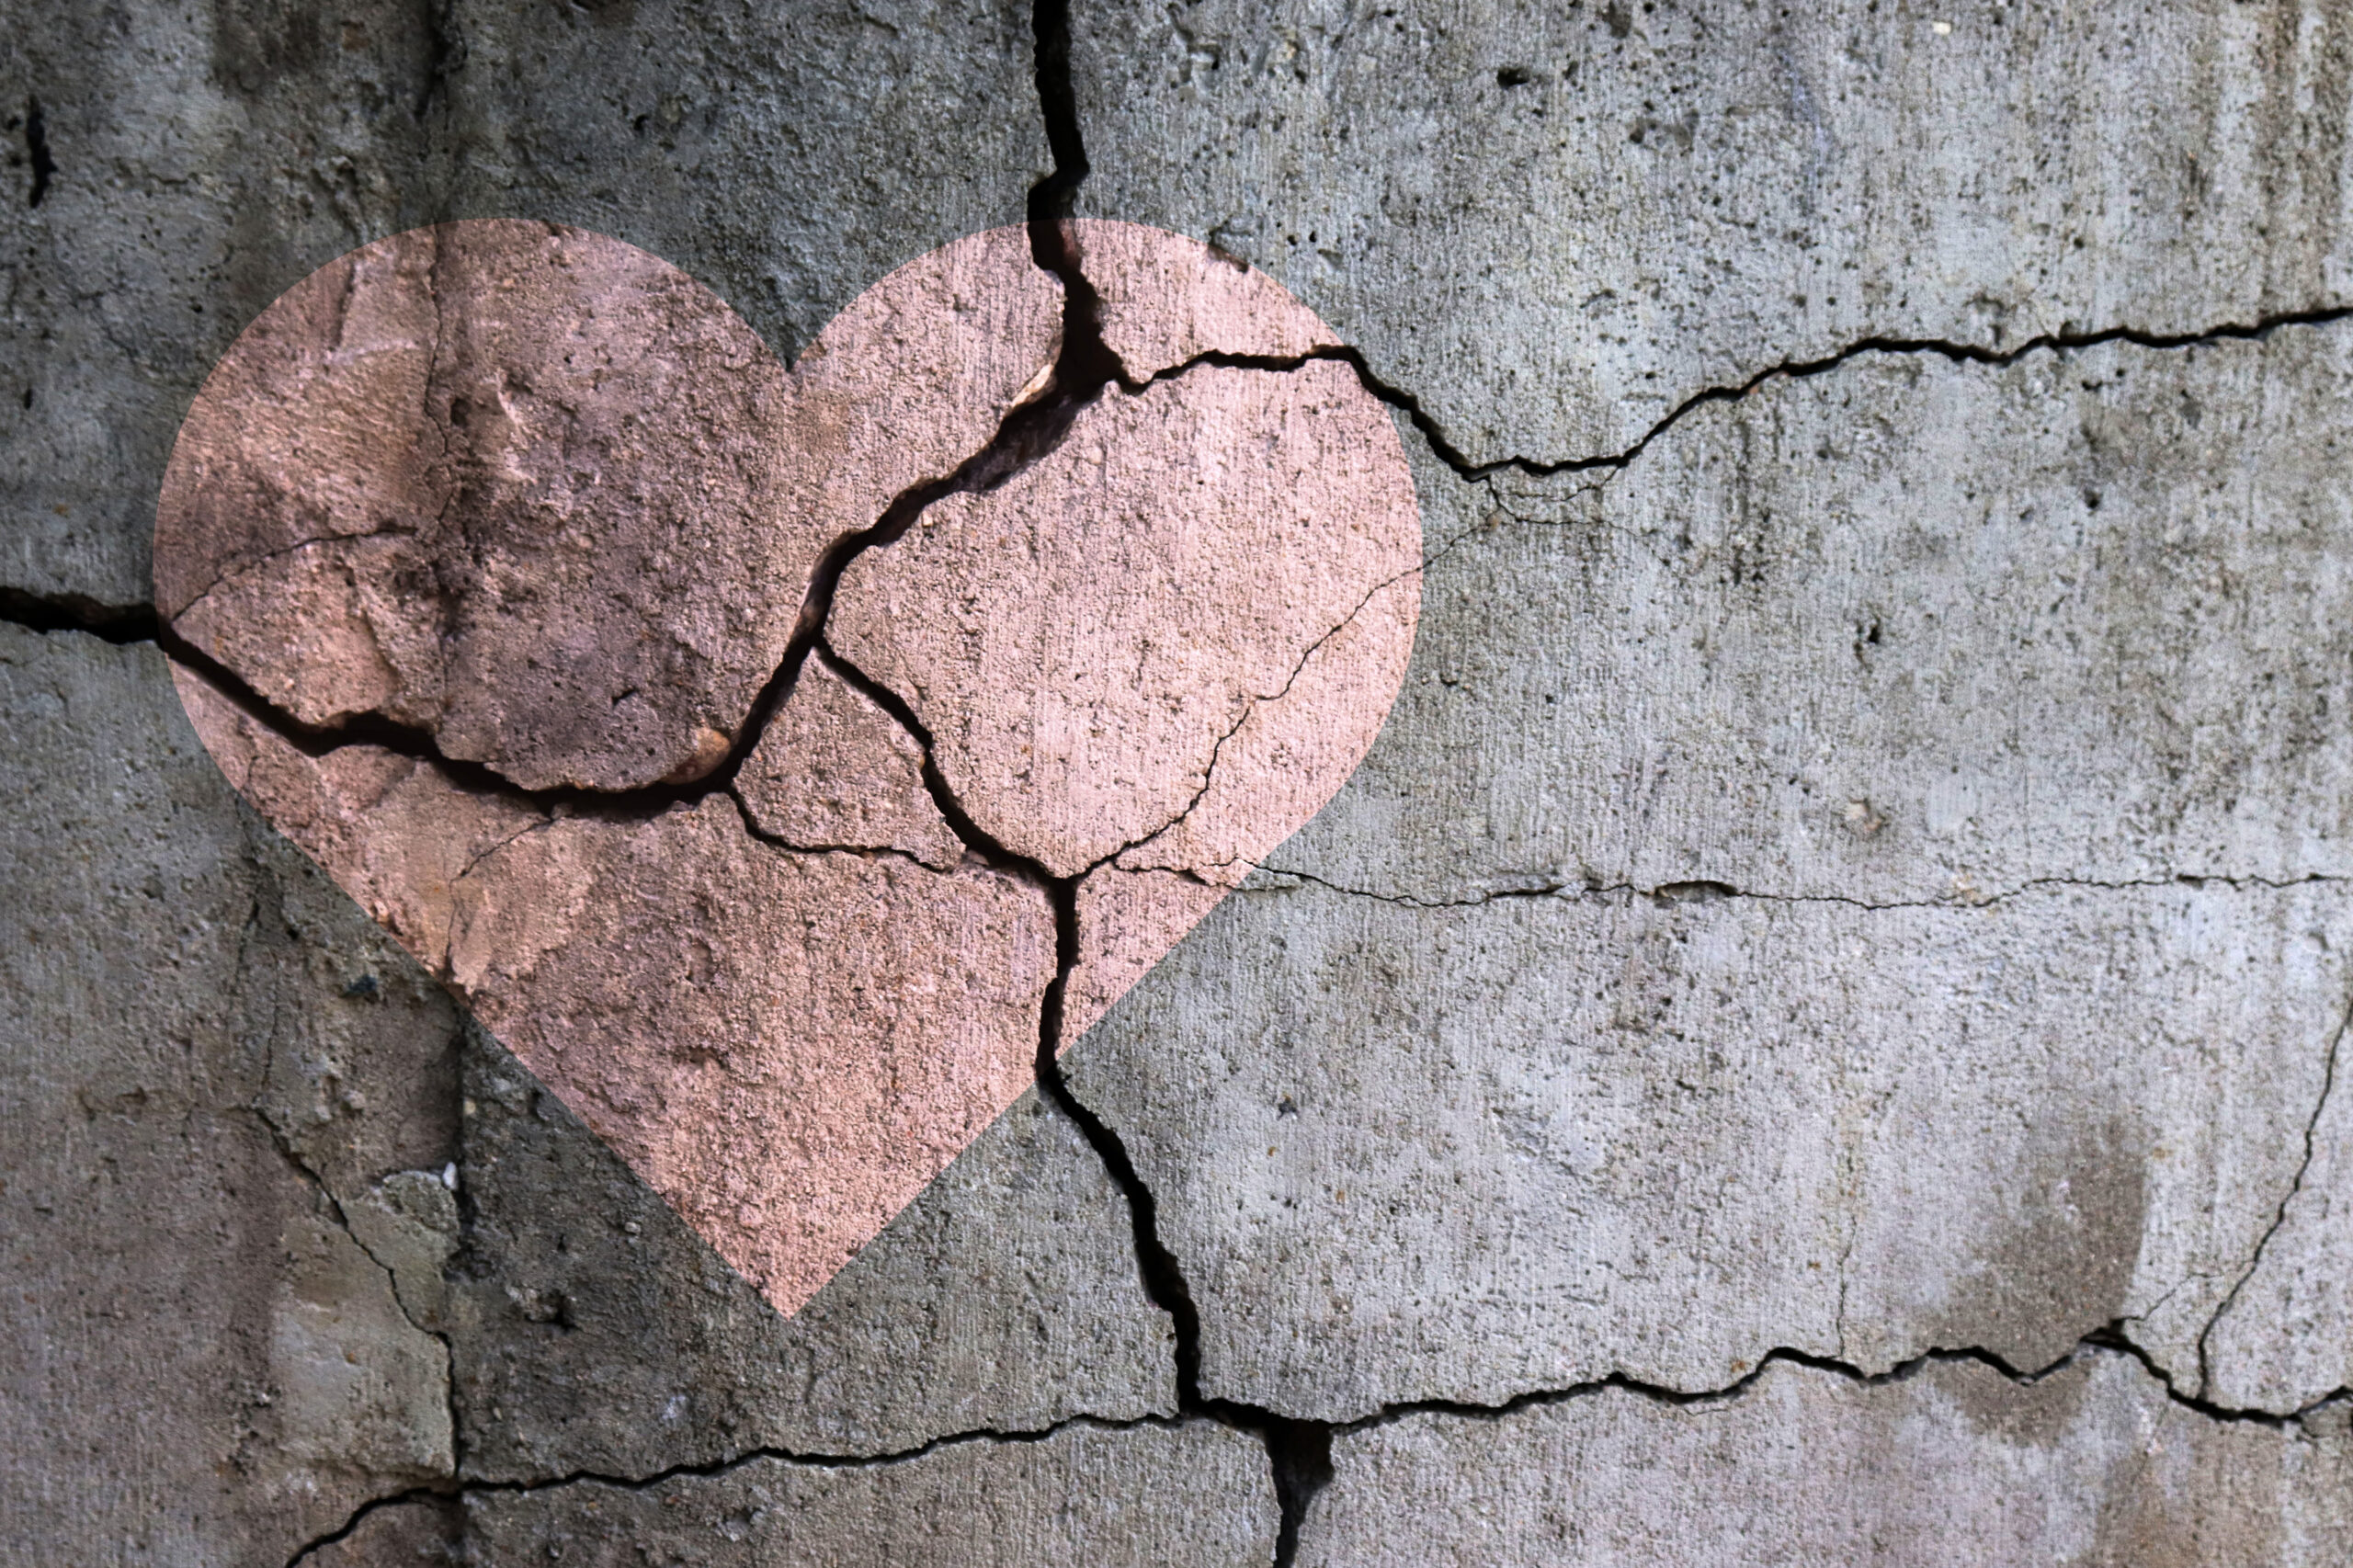 Broken pink heart with a gray background, image of new podcast episode about mind games and gaslighting with Deborah Vinall and Kristina Scharp